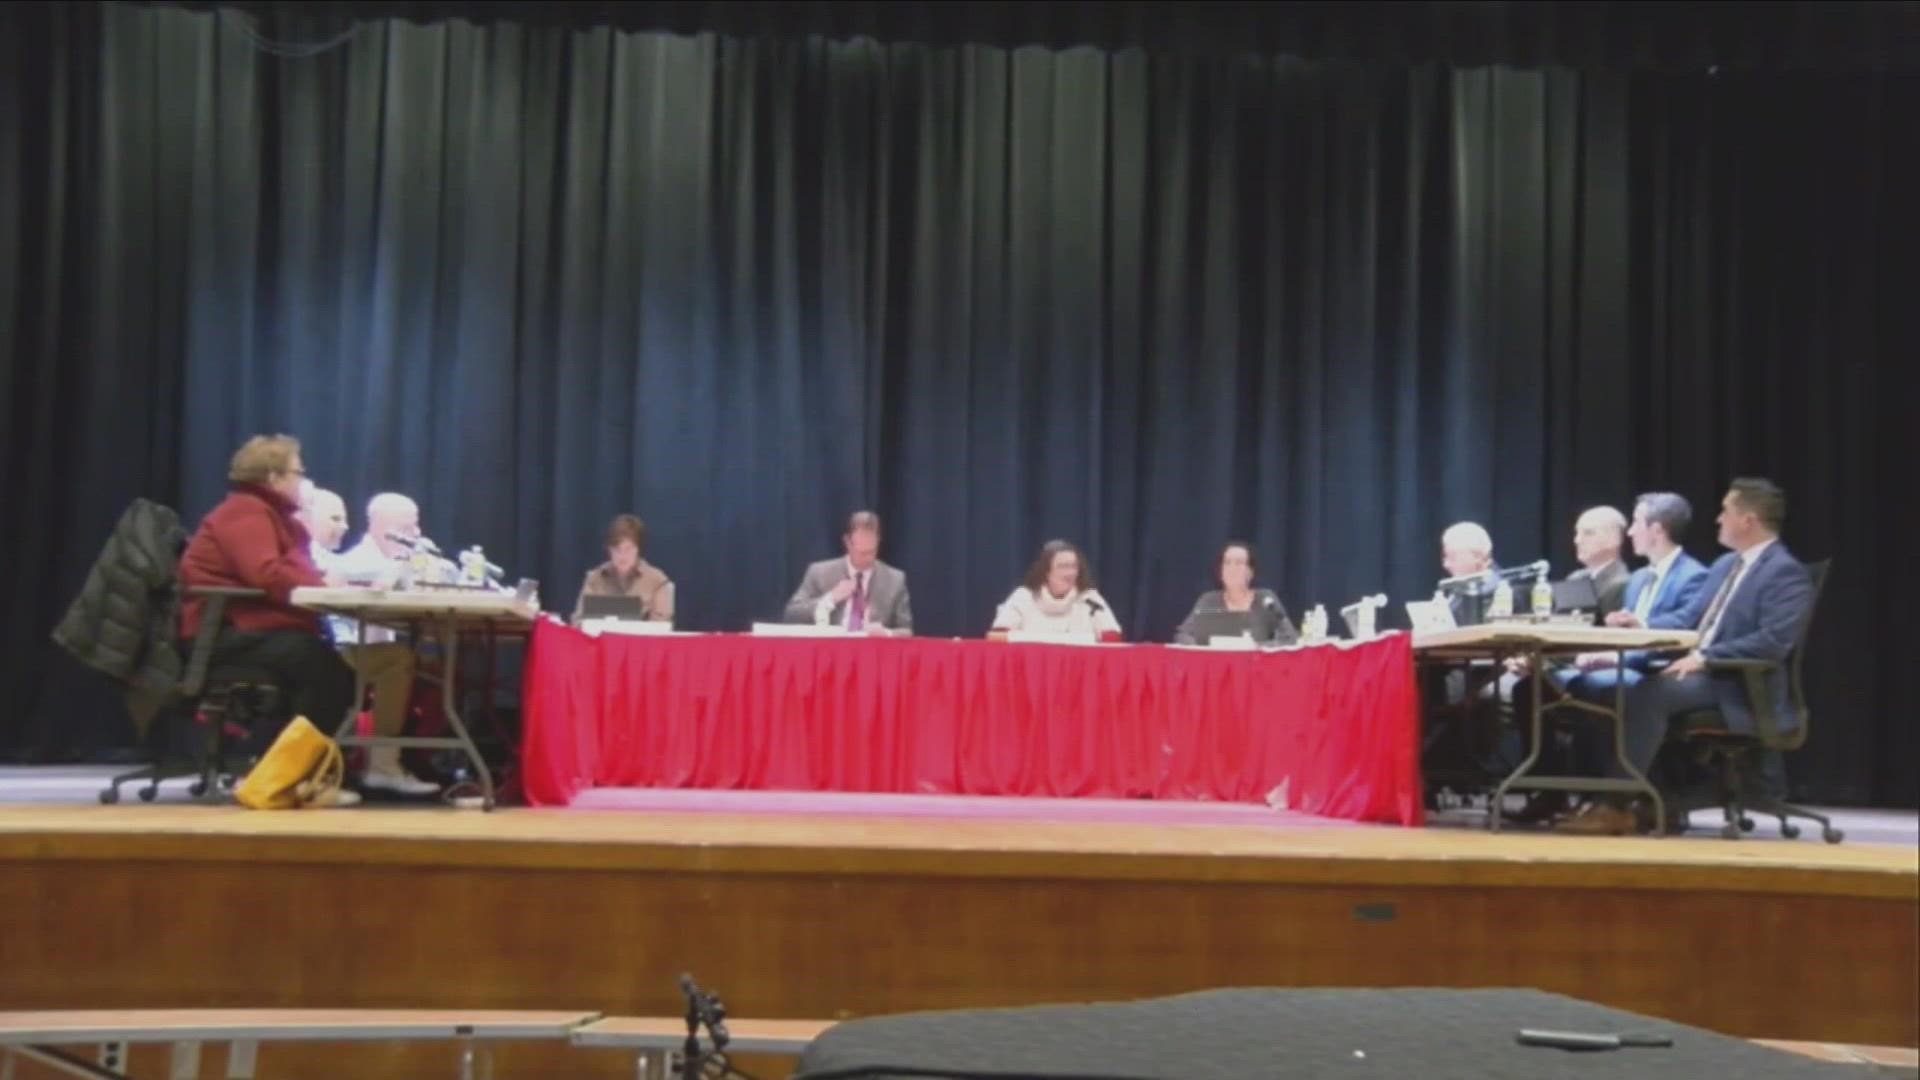 While no official action was taken, leadership in the Town of Marilla discussed why they believe changing the local school’s mascot from the Chiefs is a bad idea.